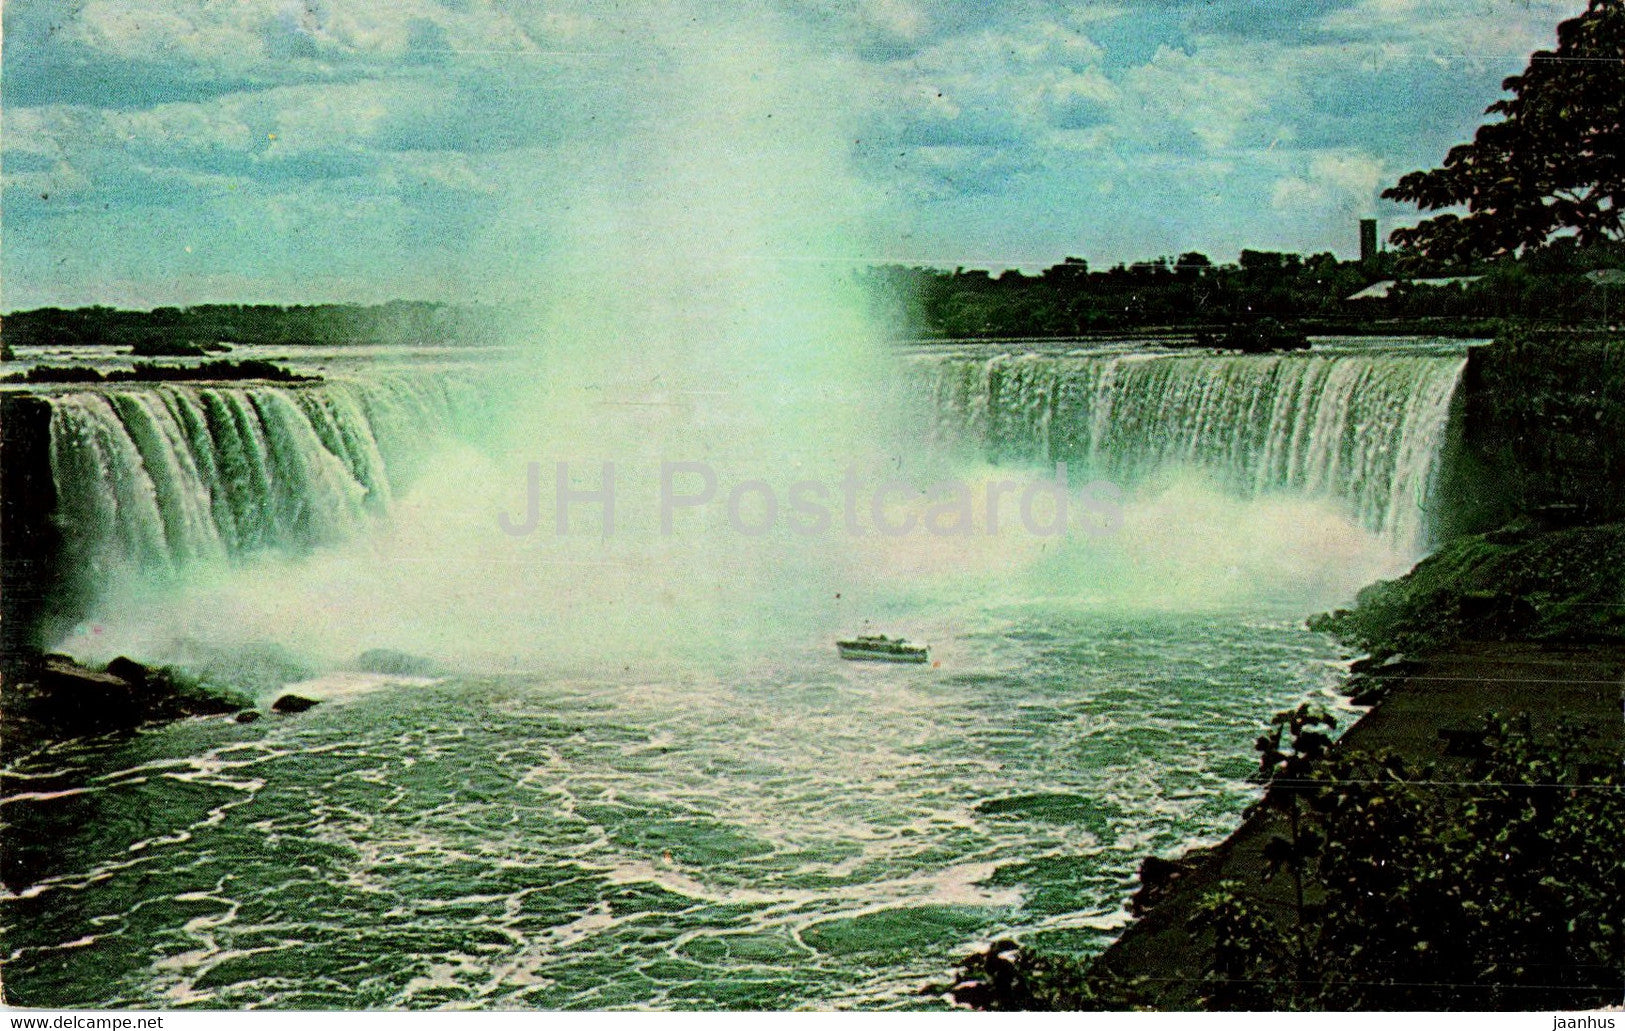 Horseshoe Falls - Niagara Falls - Showing the Maid of the Mist turning at the base - Canada - used - JH Postcards